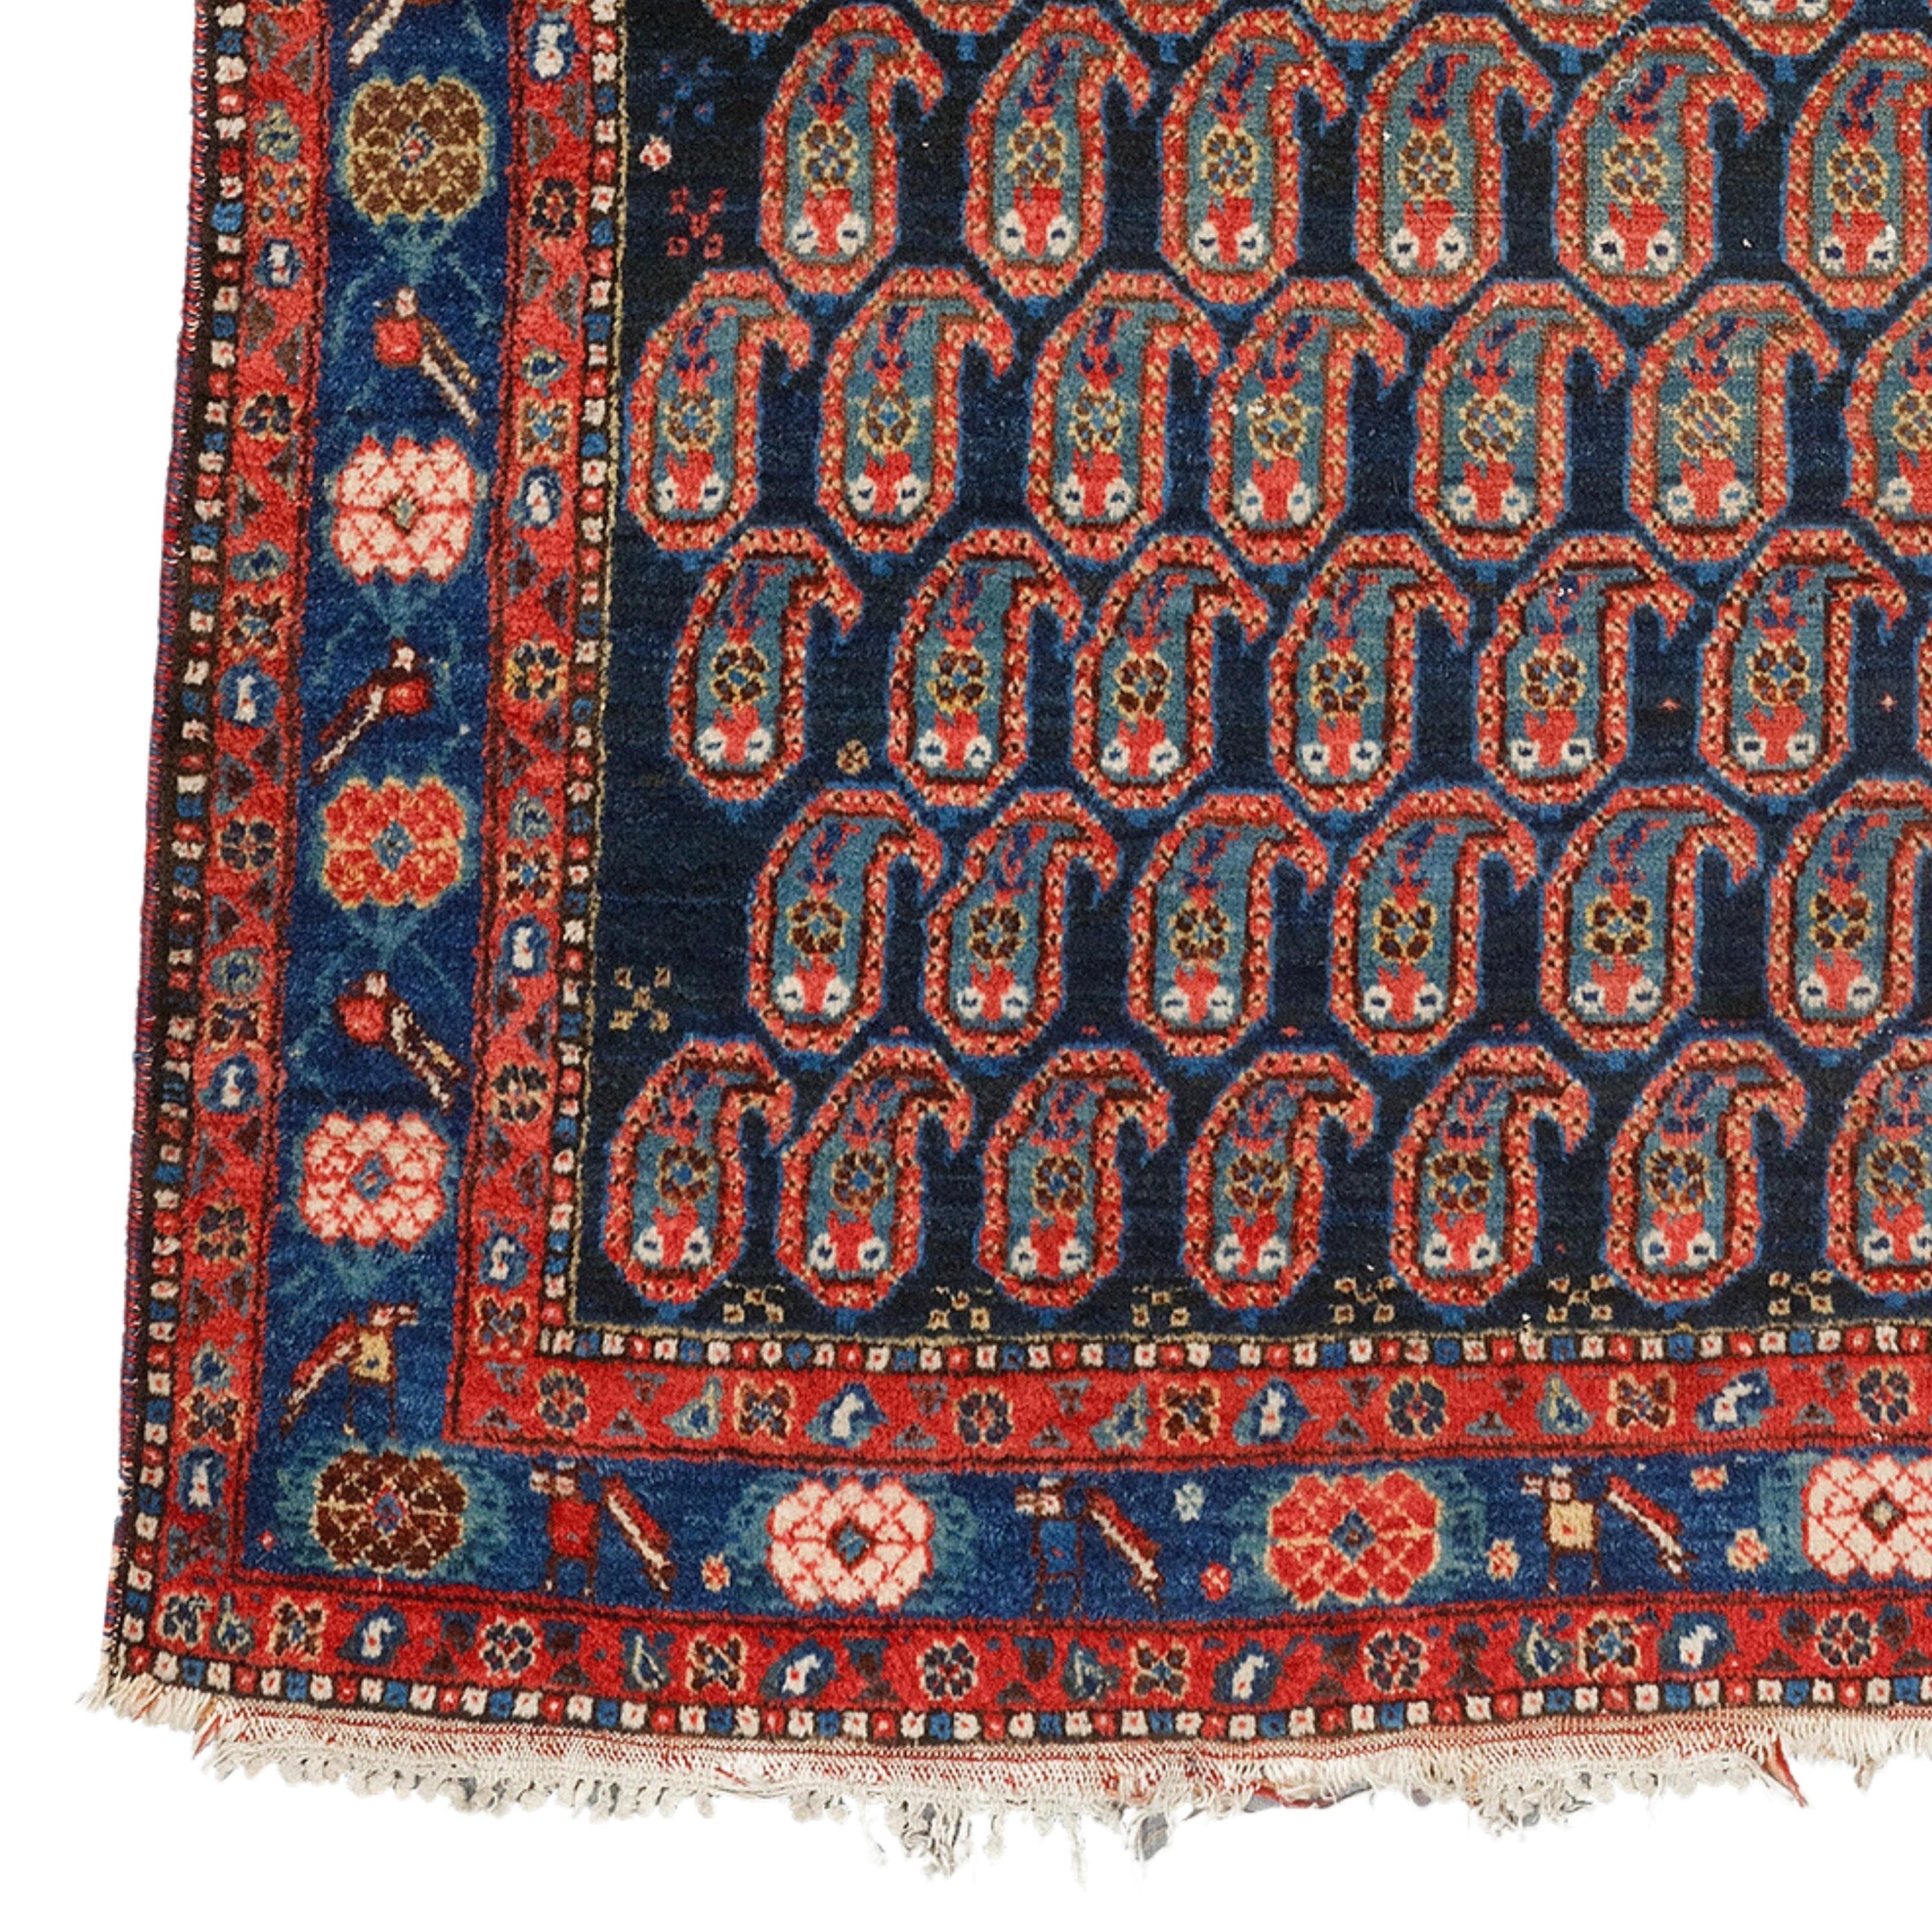 Vintage Hamadan Rug
20th Century Antique Hamadan Rug
123x193cm  4,03x6,33 Ft

Hamadan is a collective term for a variety of carpets knotted in the region around the city of the same name. The carpets knotted in the villages and towns surrounding the